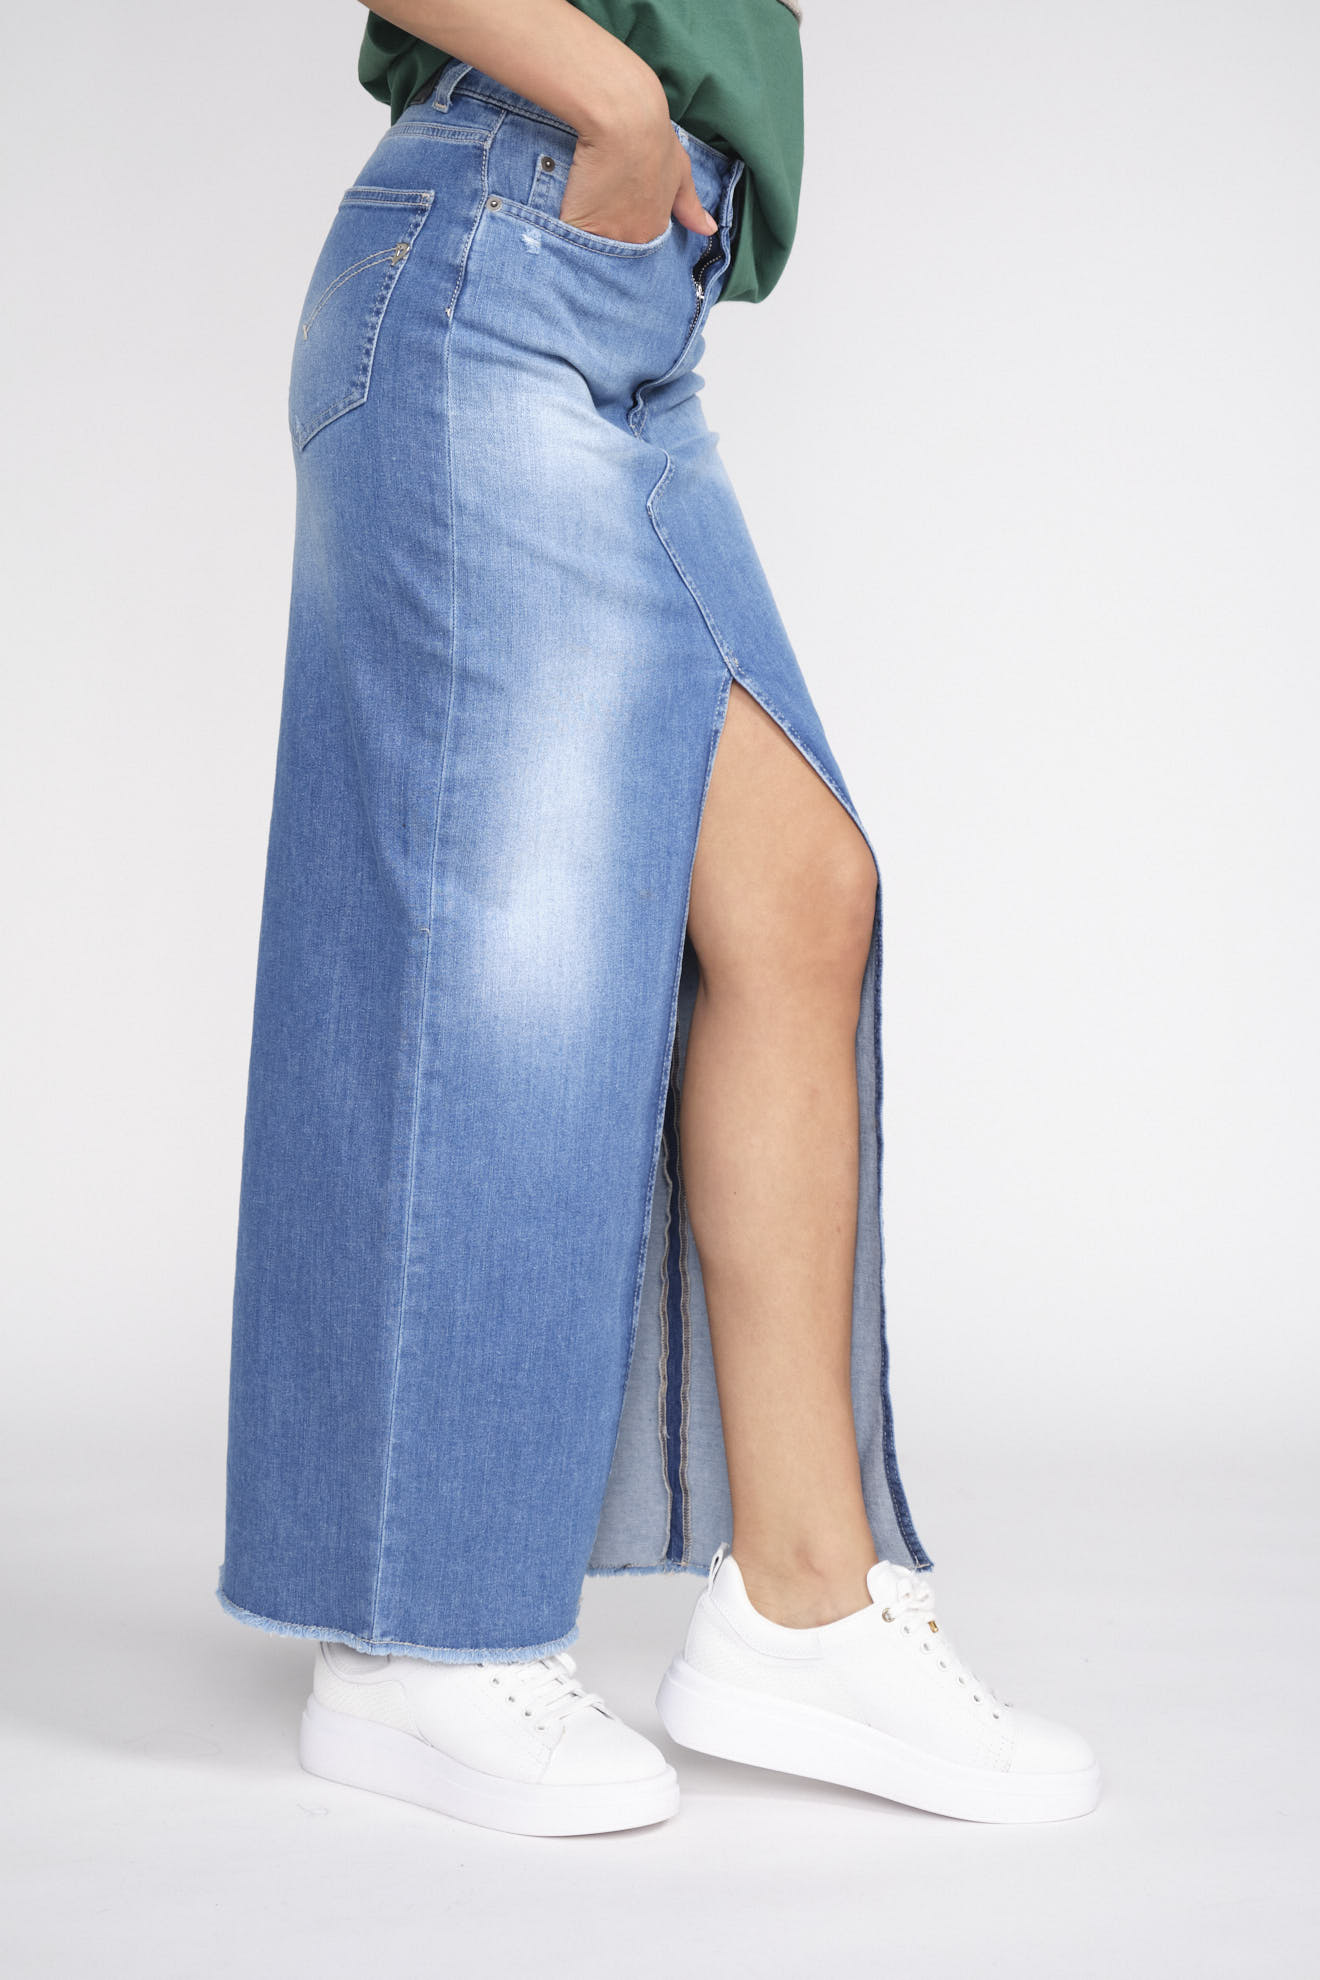 Buy Blue Skirts for Women by FOUNDRY Online | Ajio.com